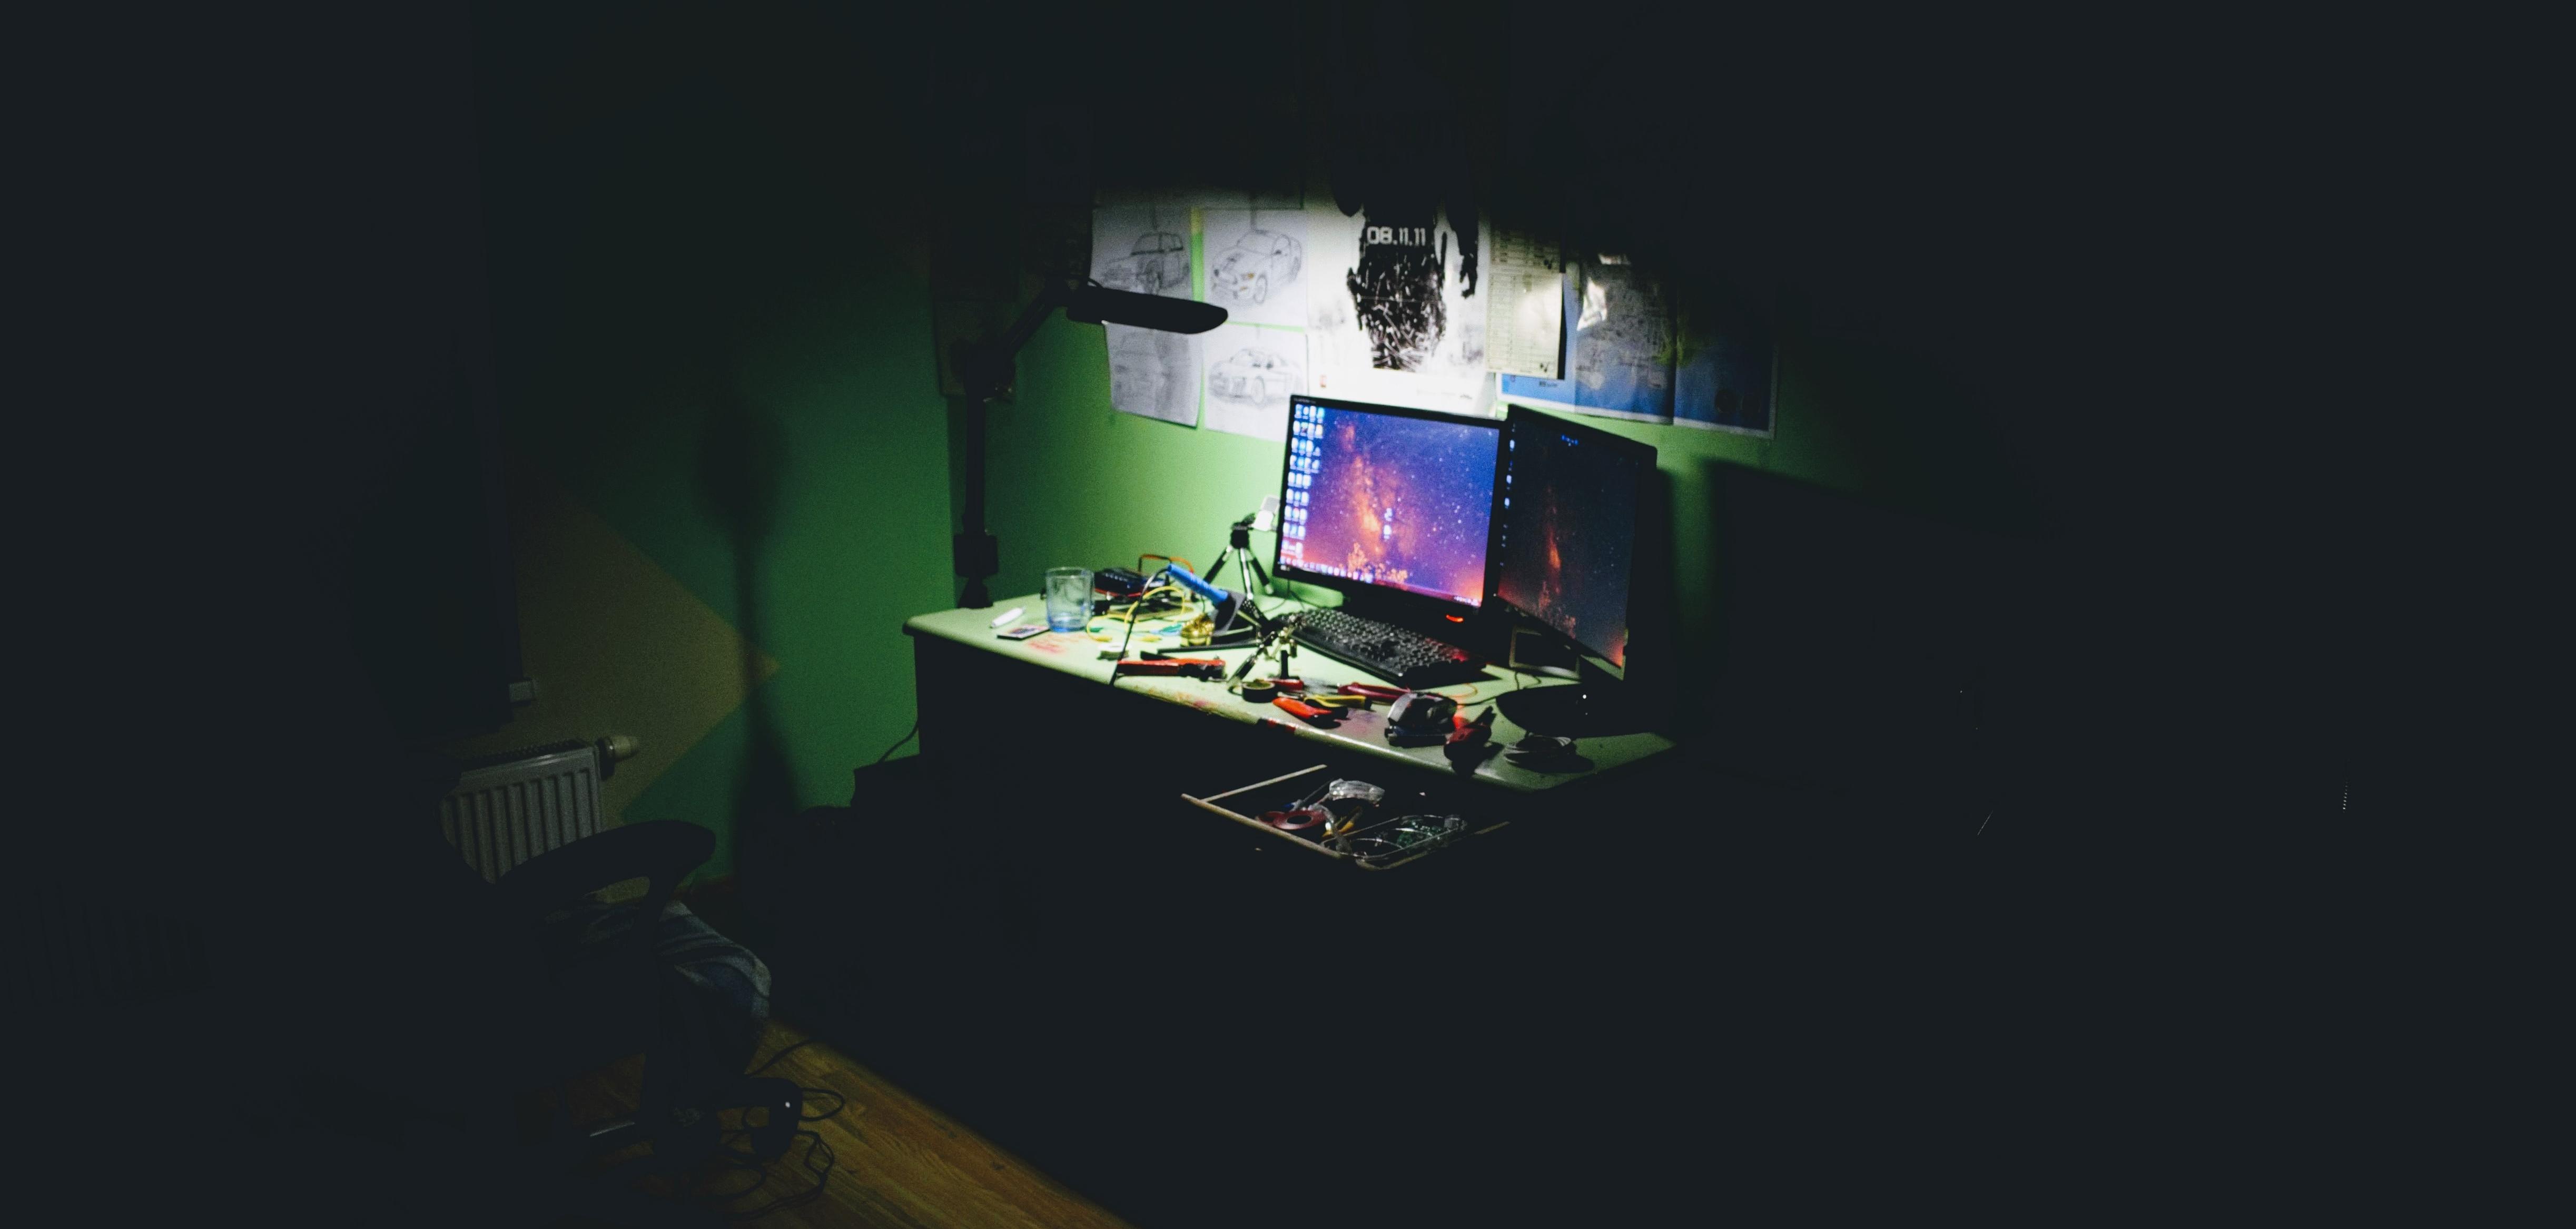 Two computer screens on a desk in a dark room. The light is focused on the computers